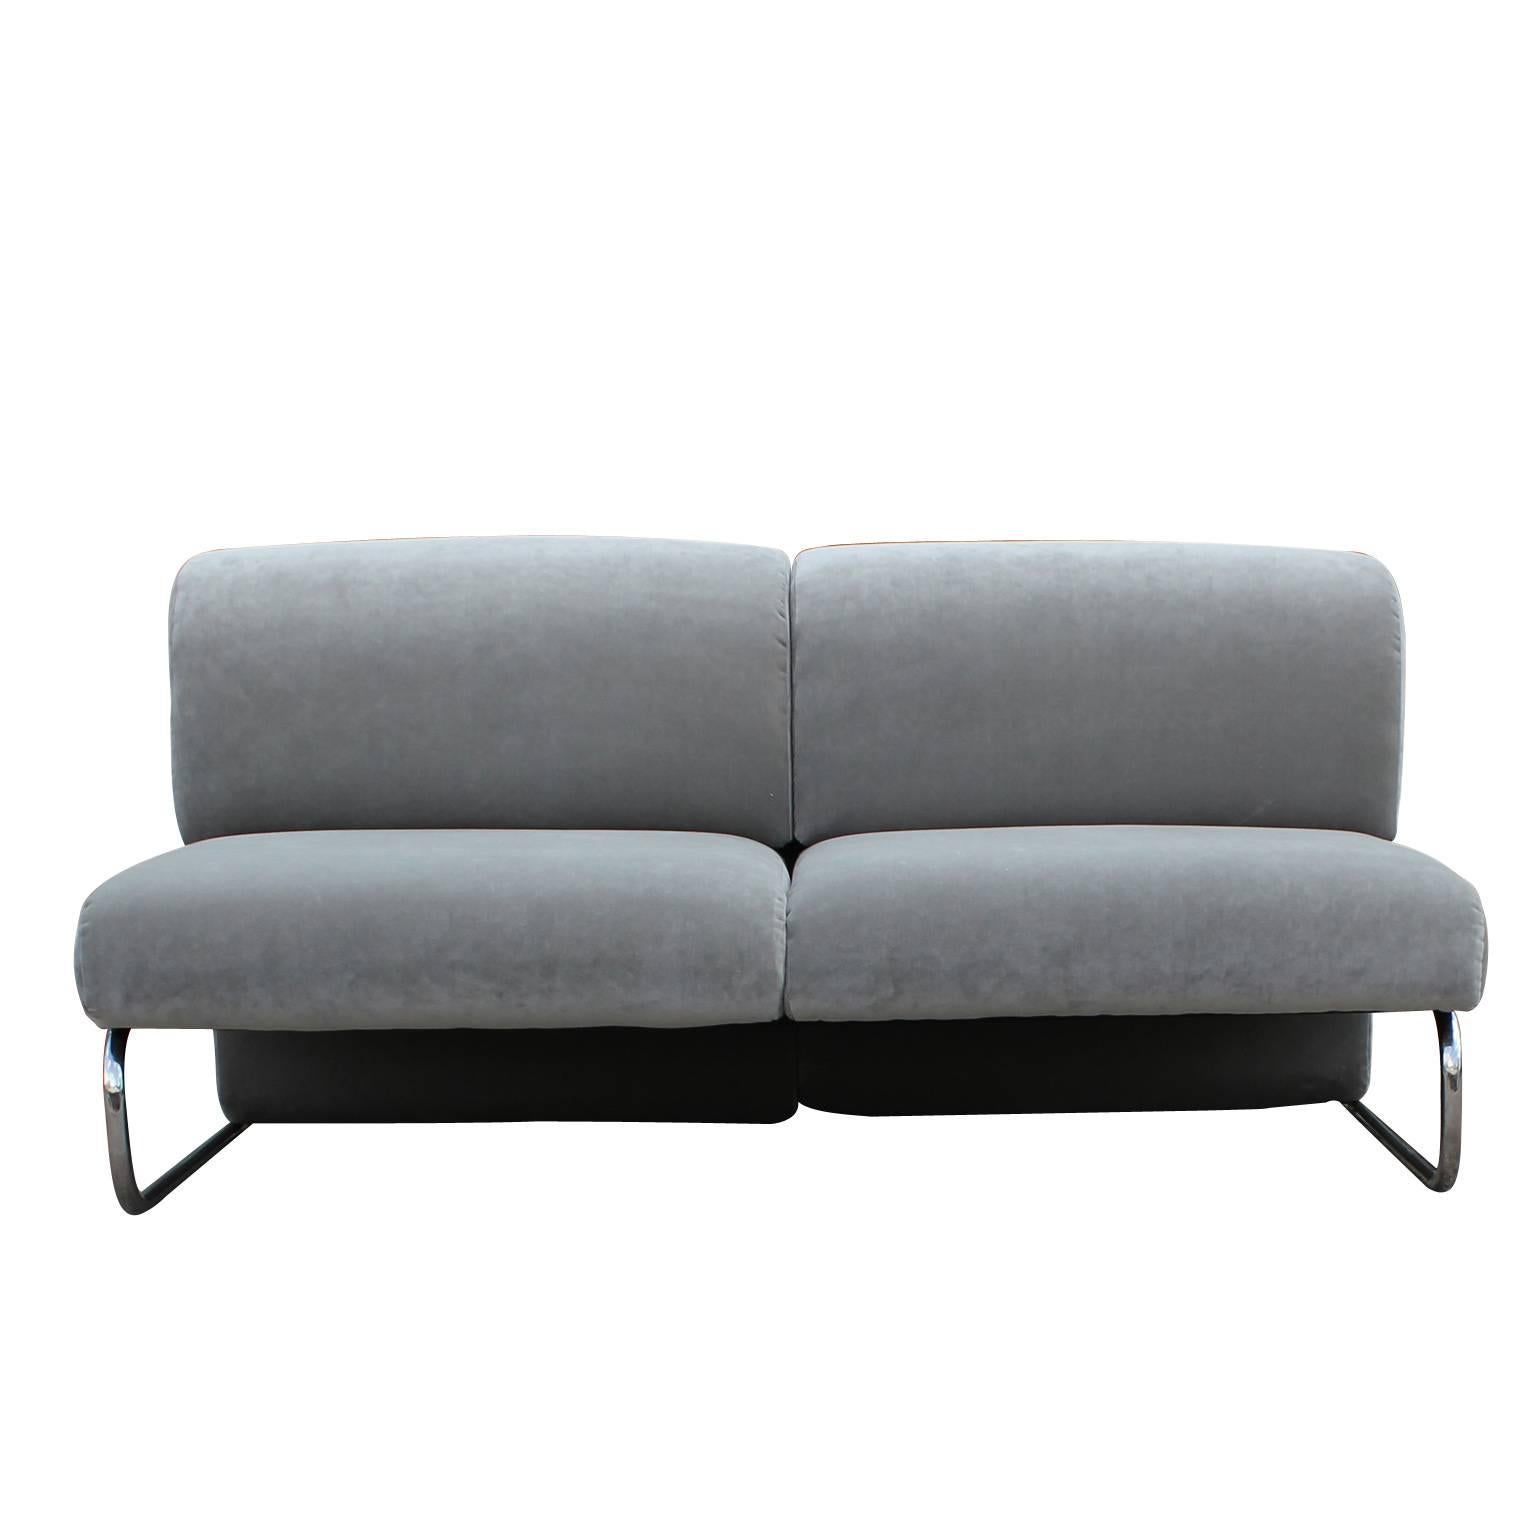 1970s Italian modern sofa recently reupholstered in a beautiful soft grey velvet with tubular chrome perfect for your mid-century modern home. 